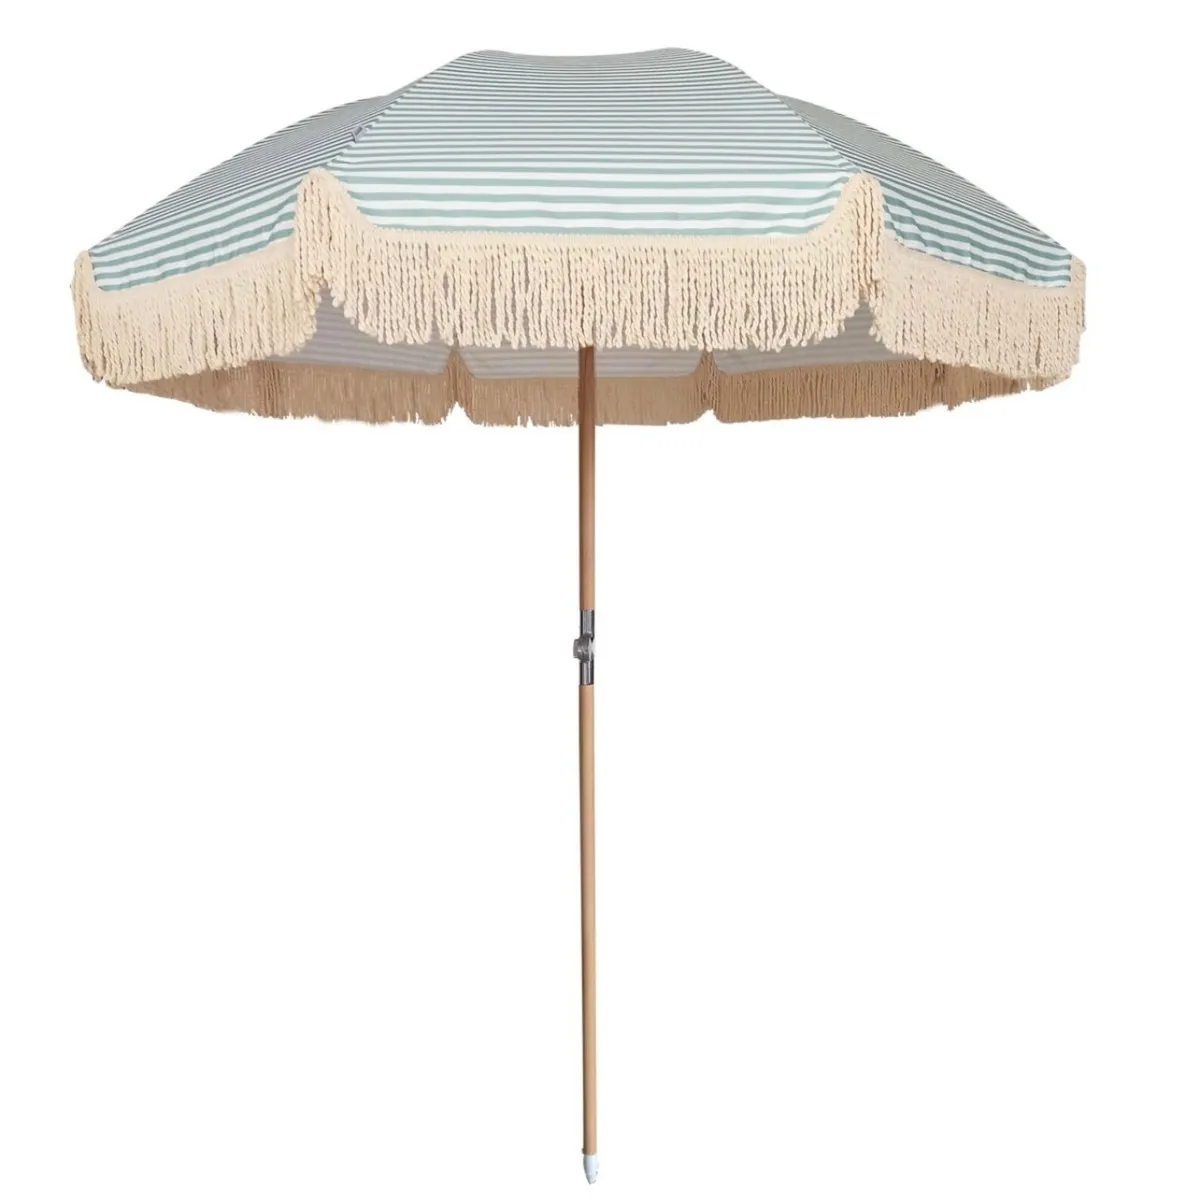 Striped blue and white parasol with fringed trim